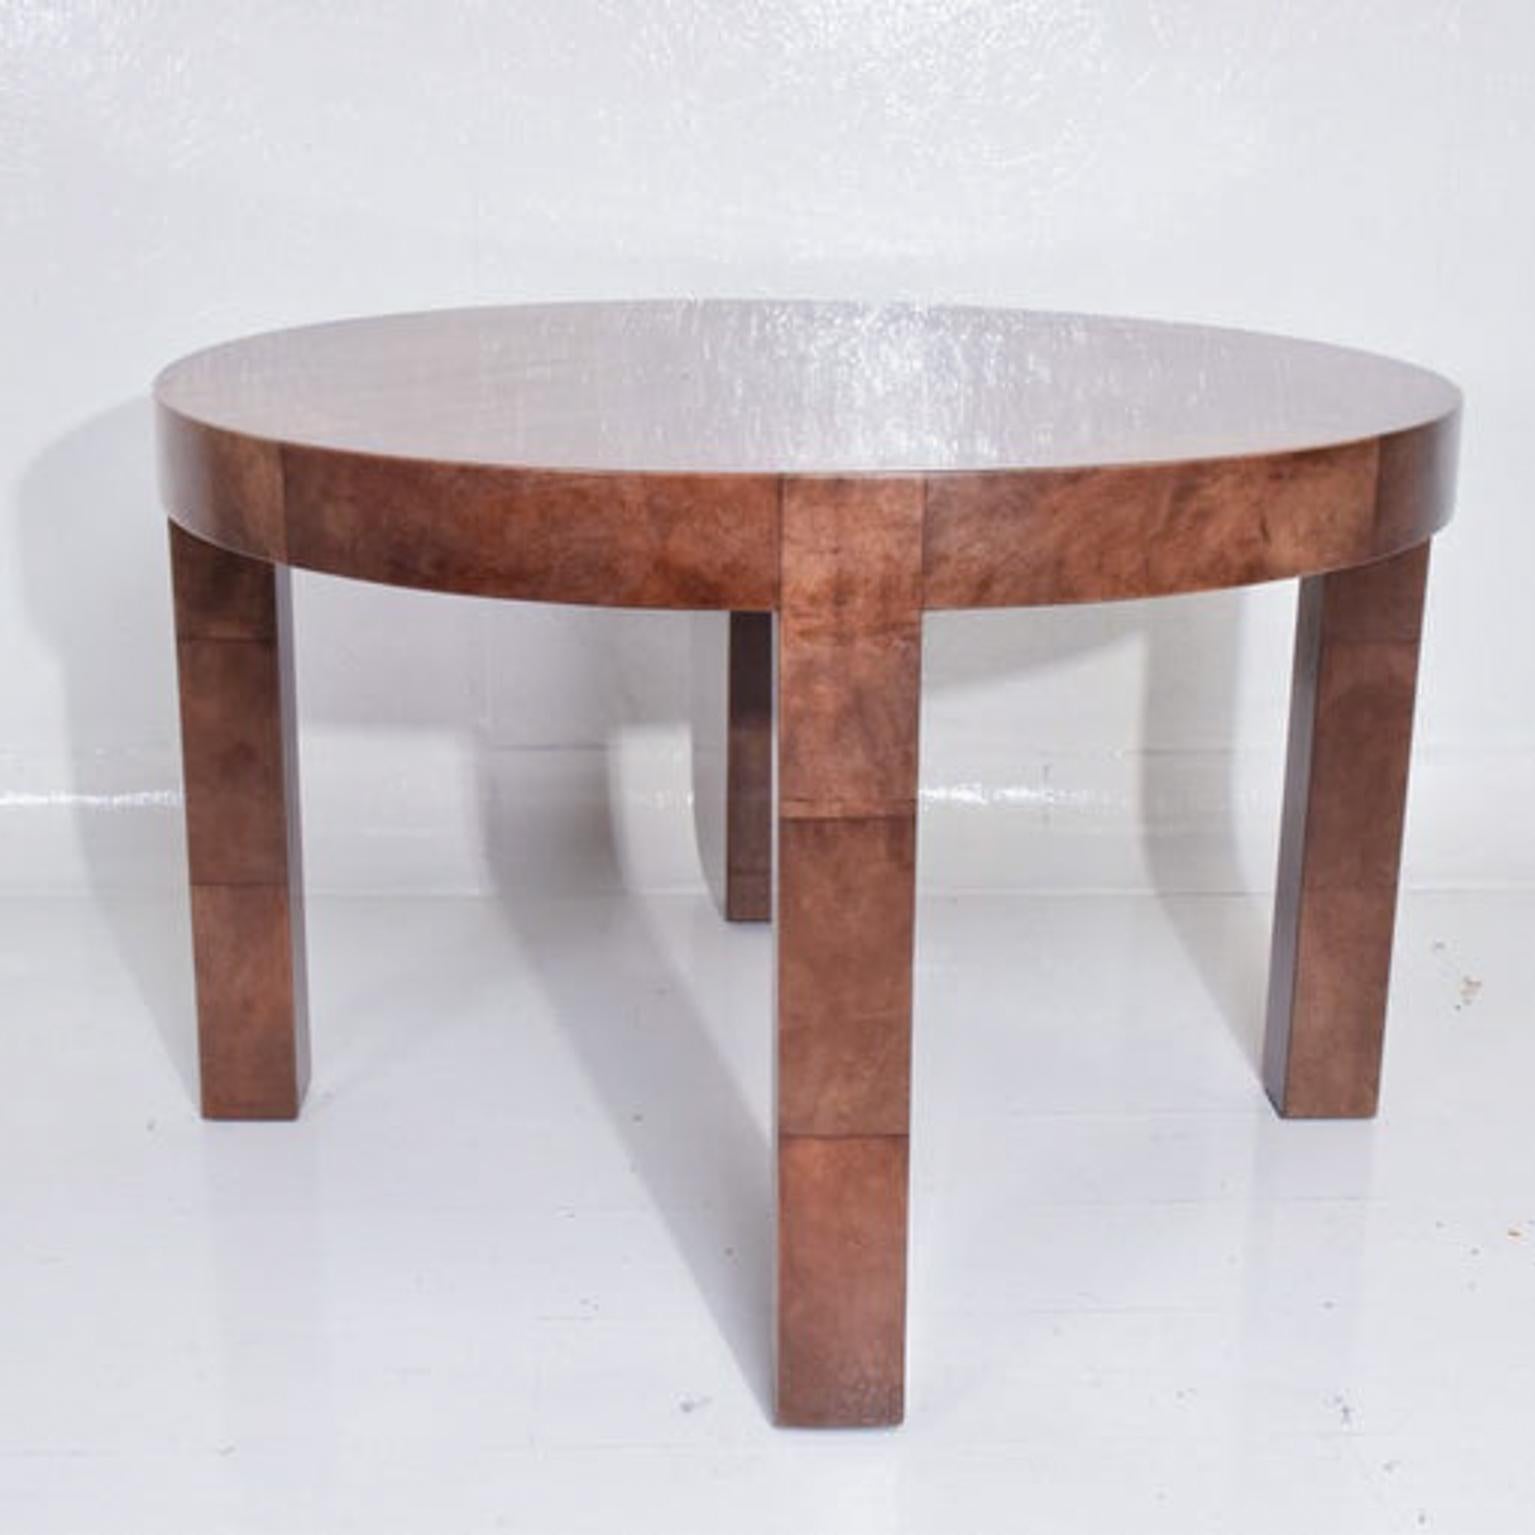 Sensational lacquered goatskin wrapped dining table in caramel brown. Sheer Elegance.
Intimate dining, circular form on thick legs. No extension leaves.
Unmarked. Attributed to designs of Aldo Tura Italy 1960s and style of Karl Springer.
Original